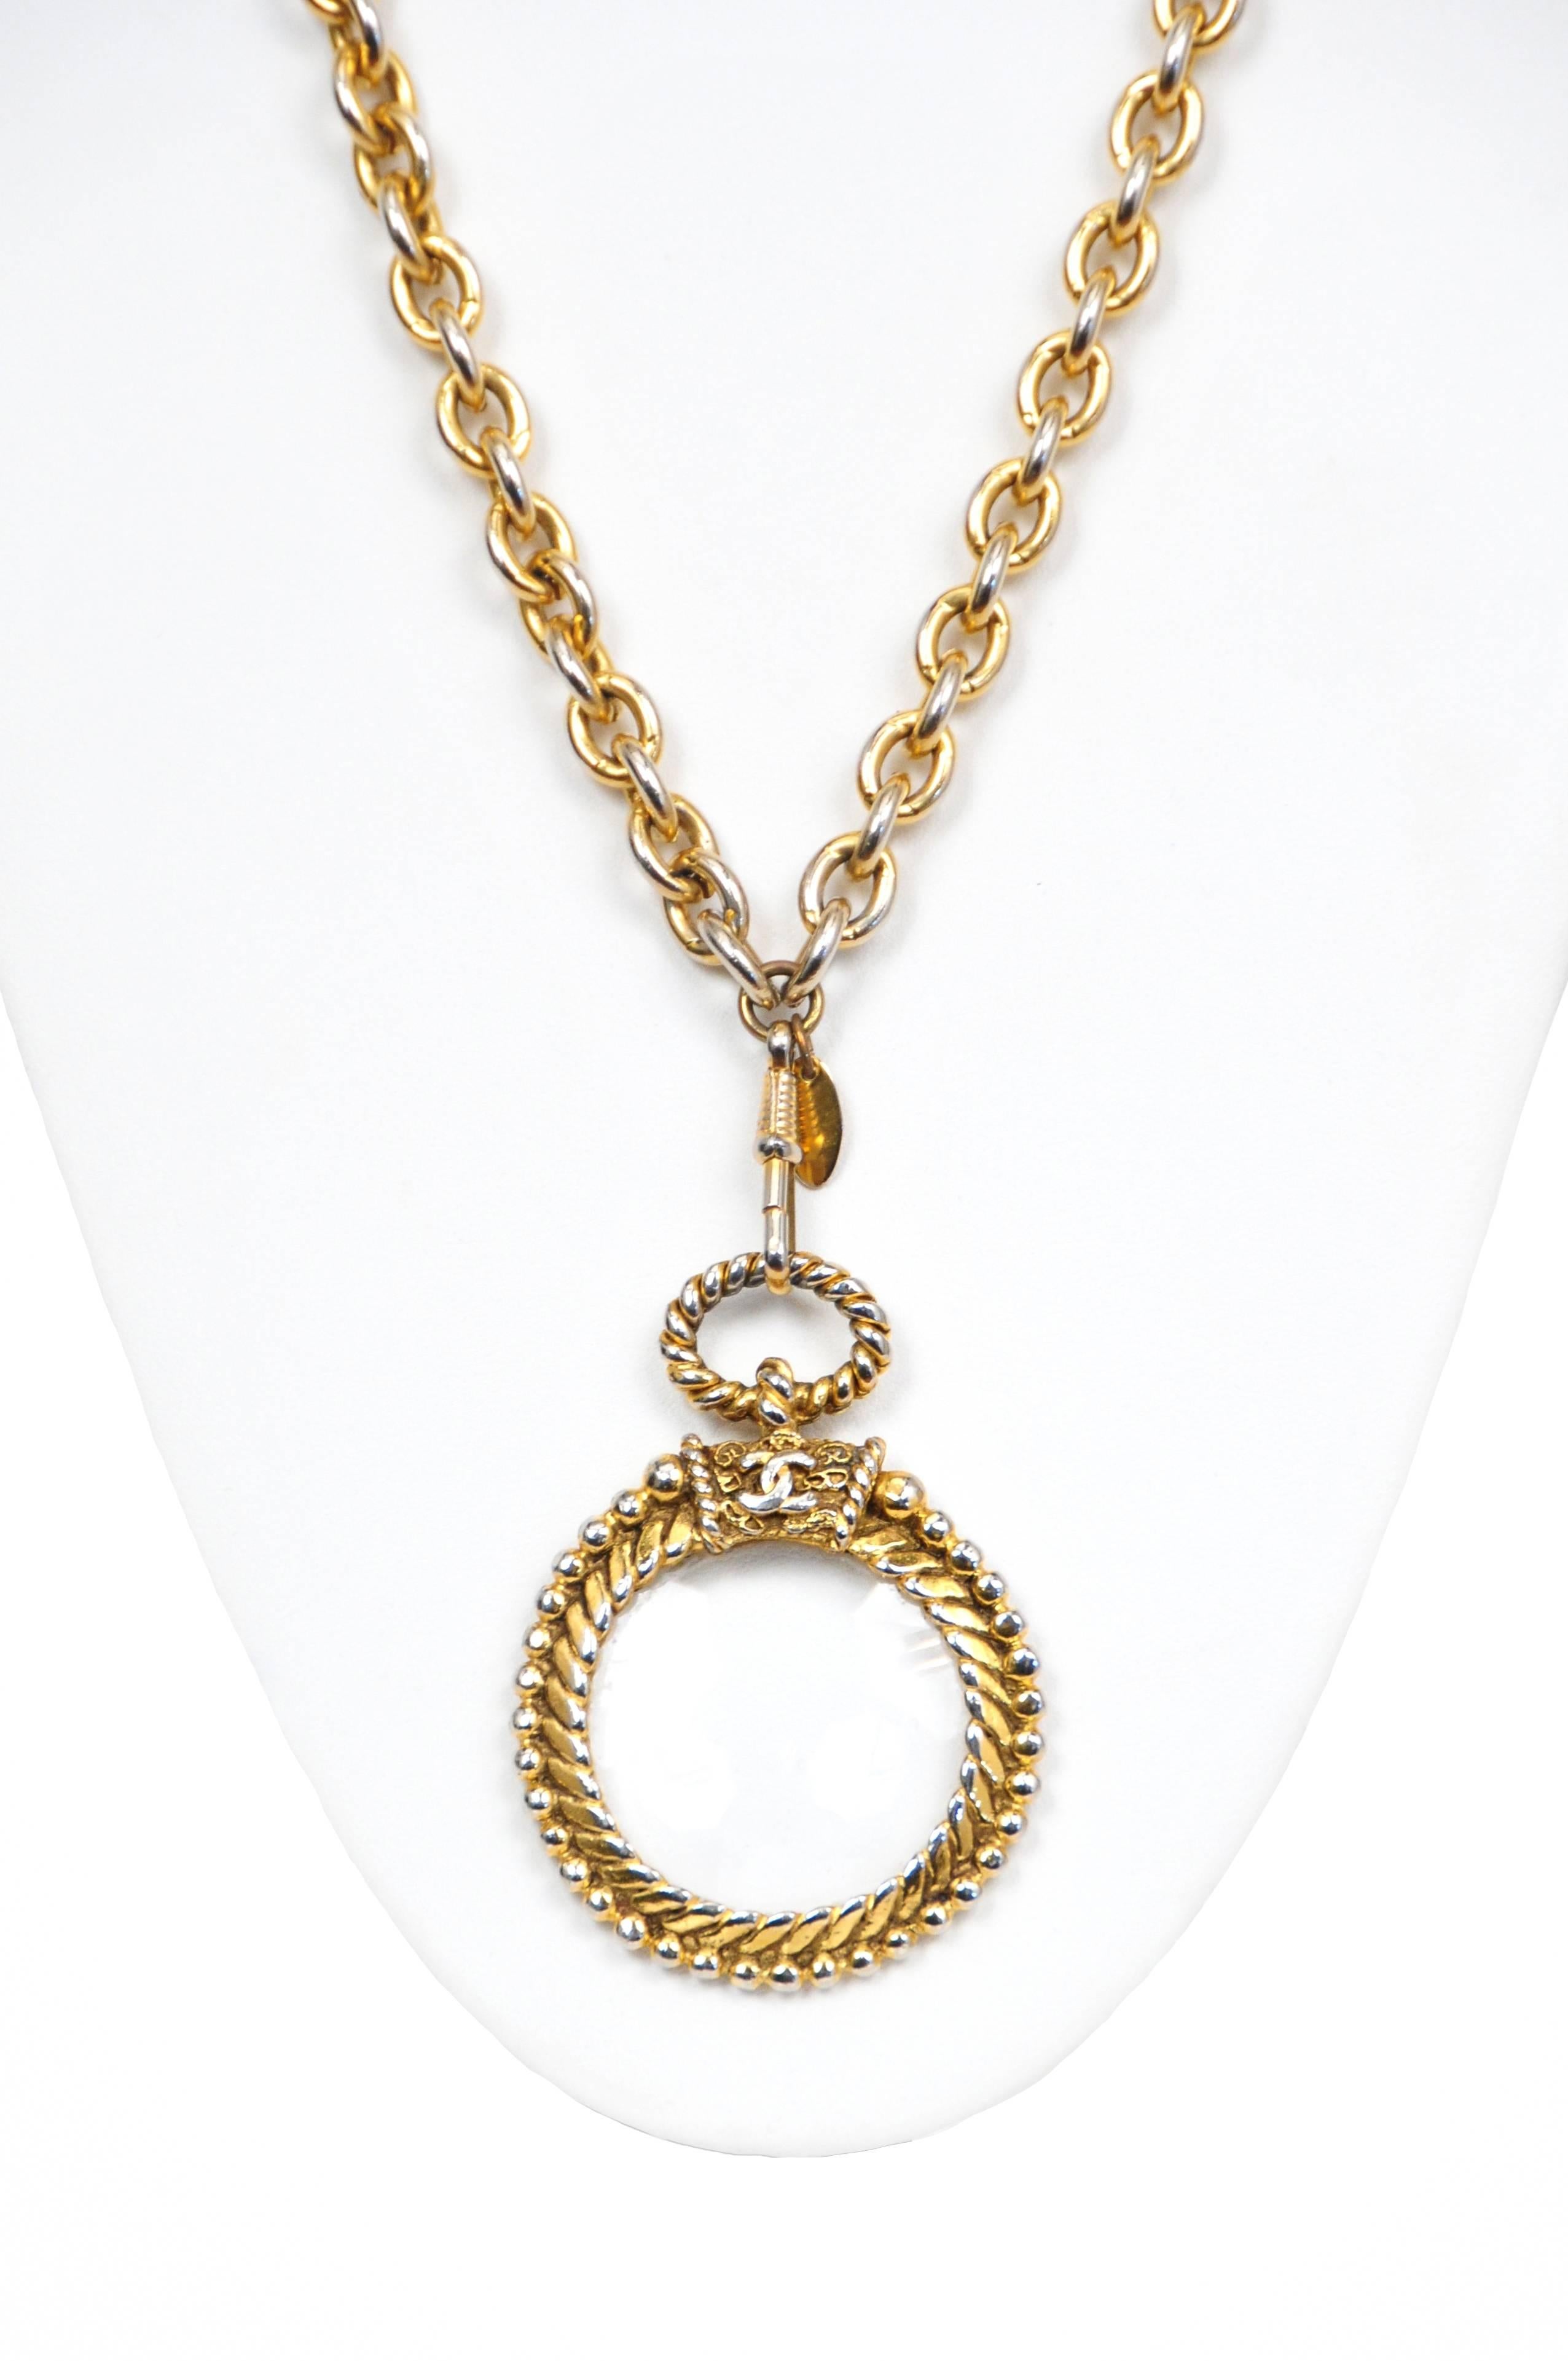 Vintage Chanel gold monocle necklace featuring the CC logo. 